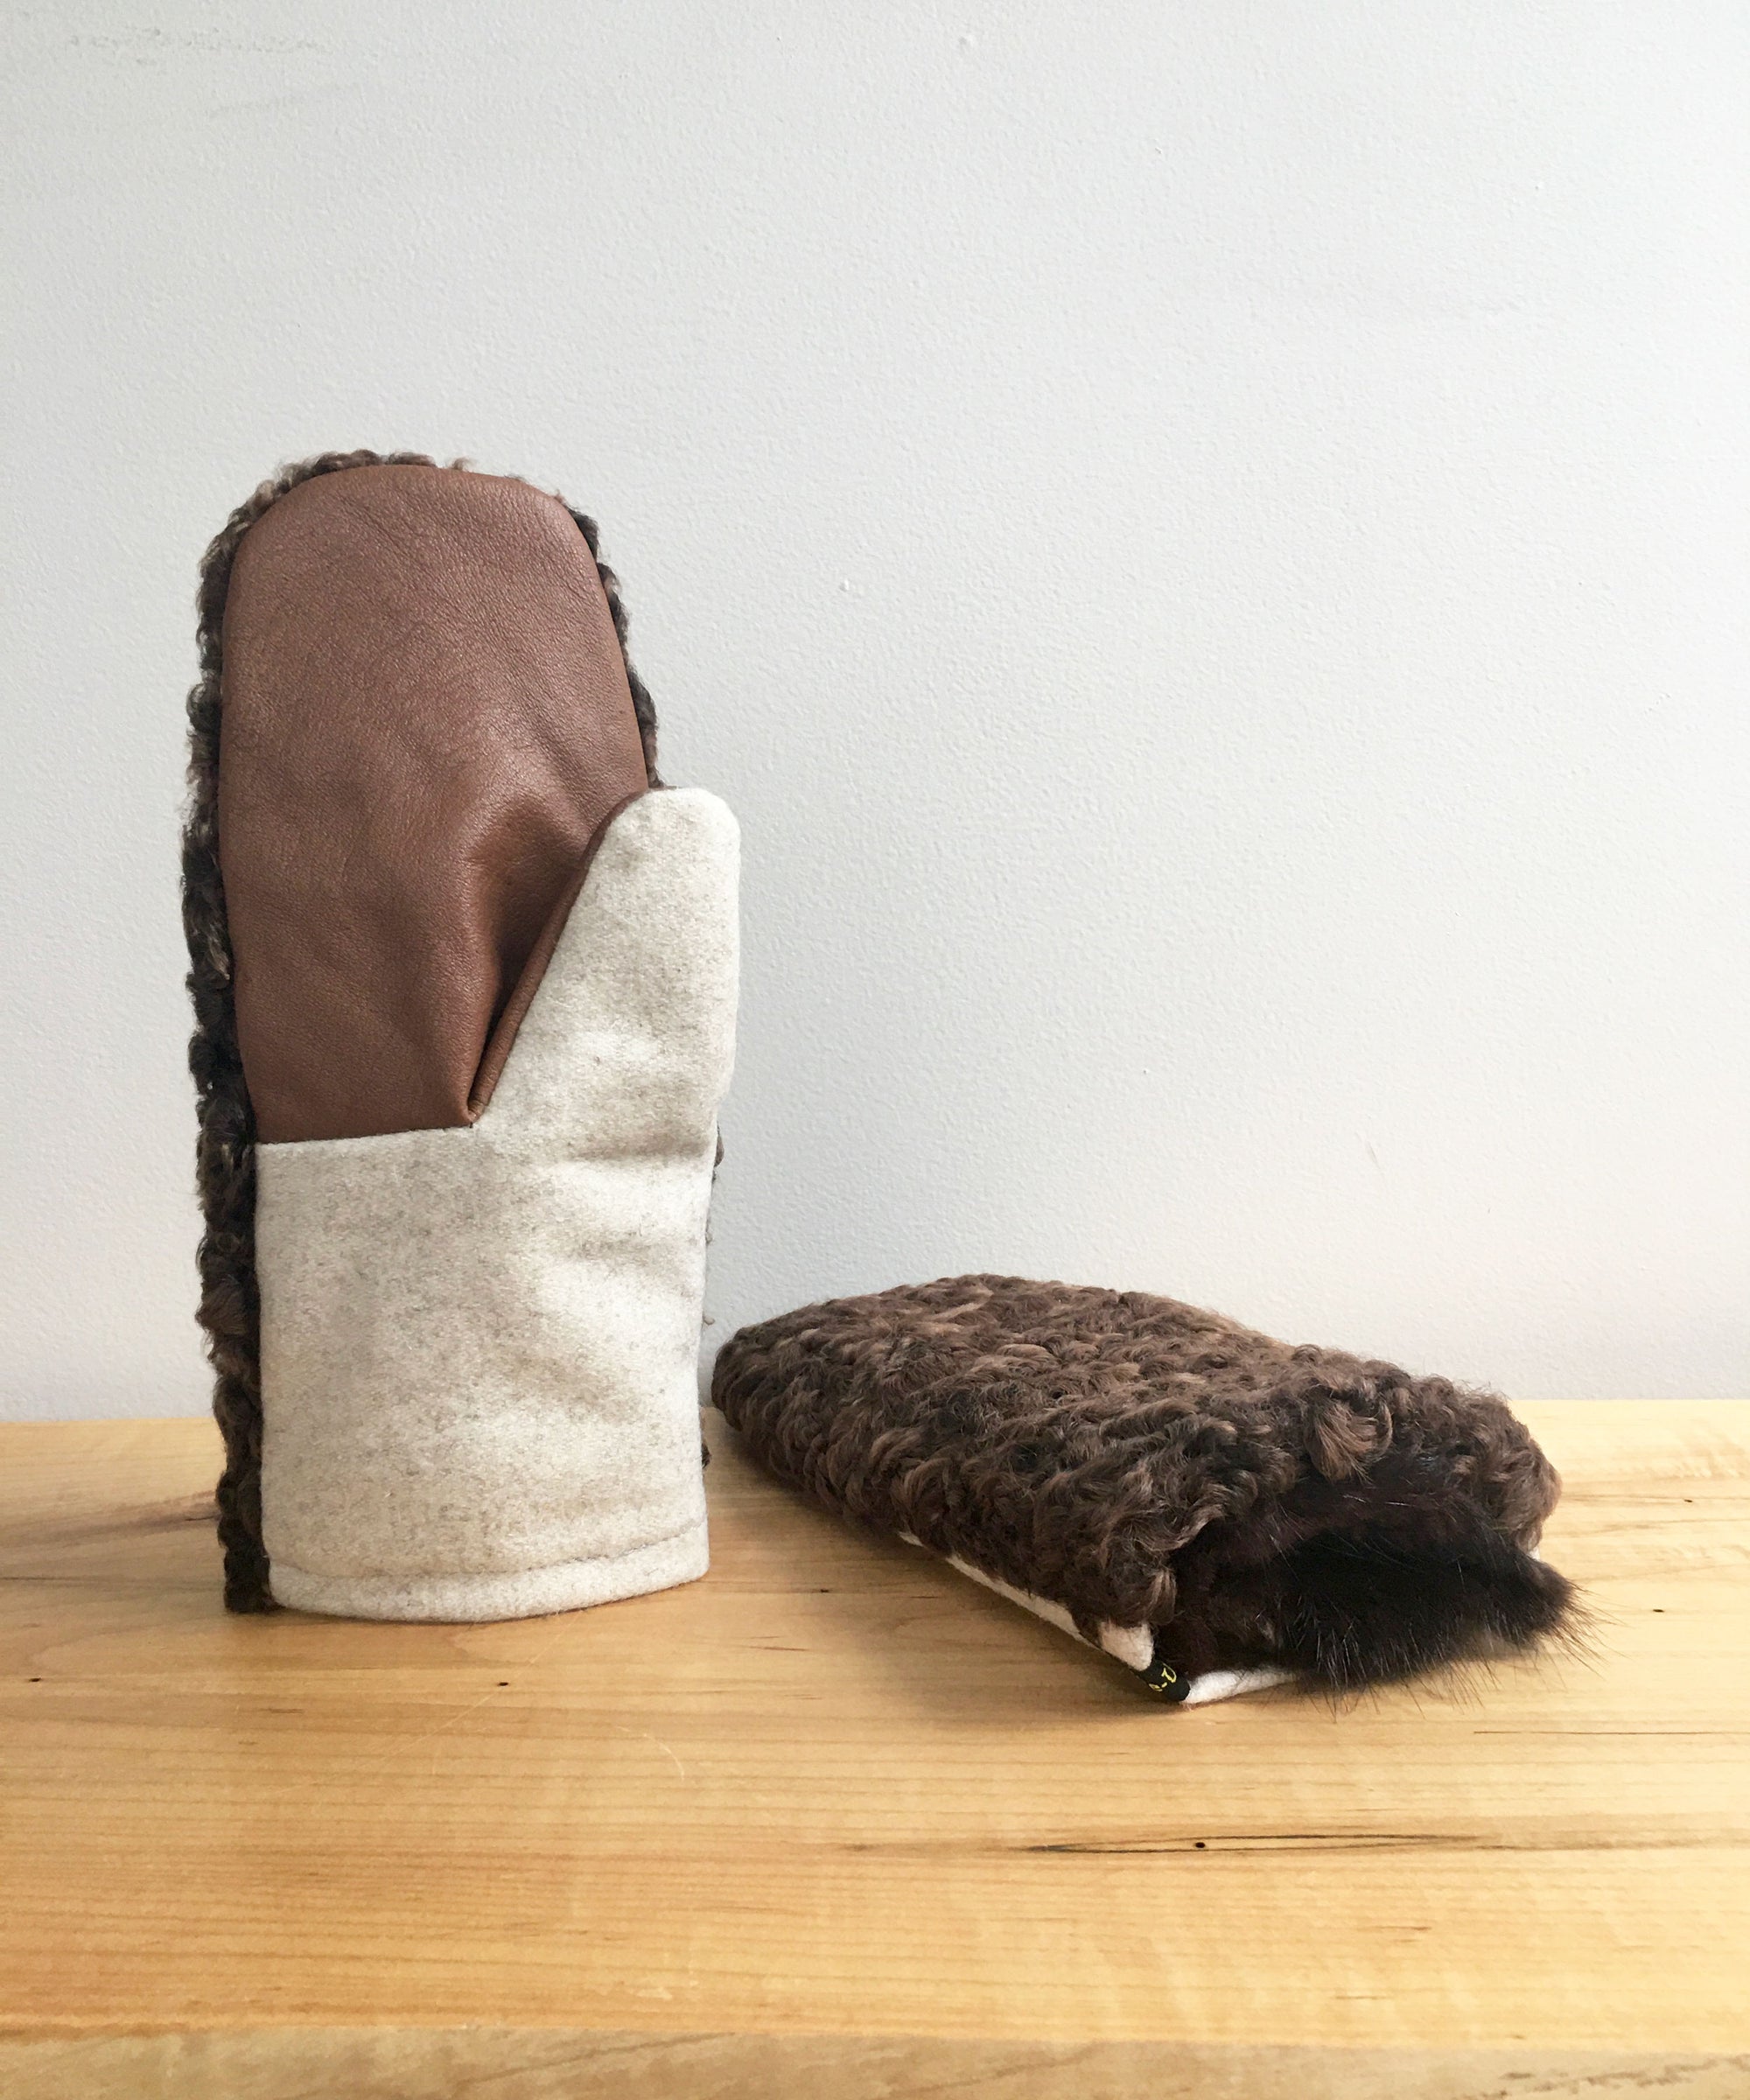 Sustainable Real Fur Winter Mittens with Fur Lining made in Canada, Brown Persian Lamb Mittens with Fur Lining